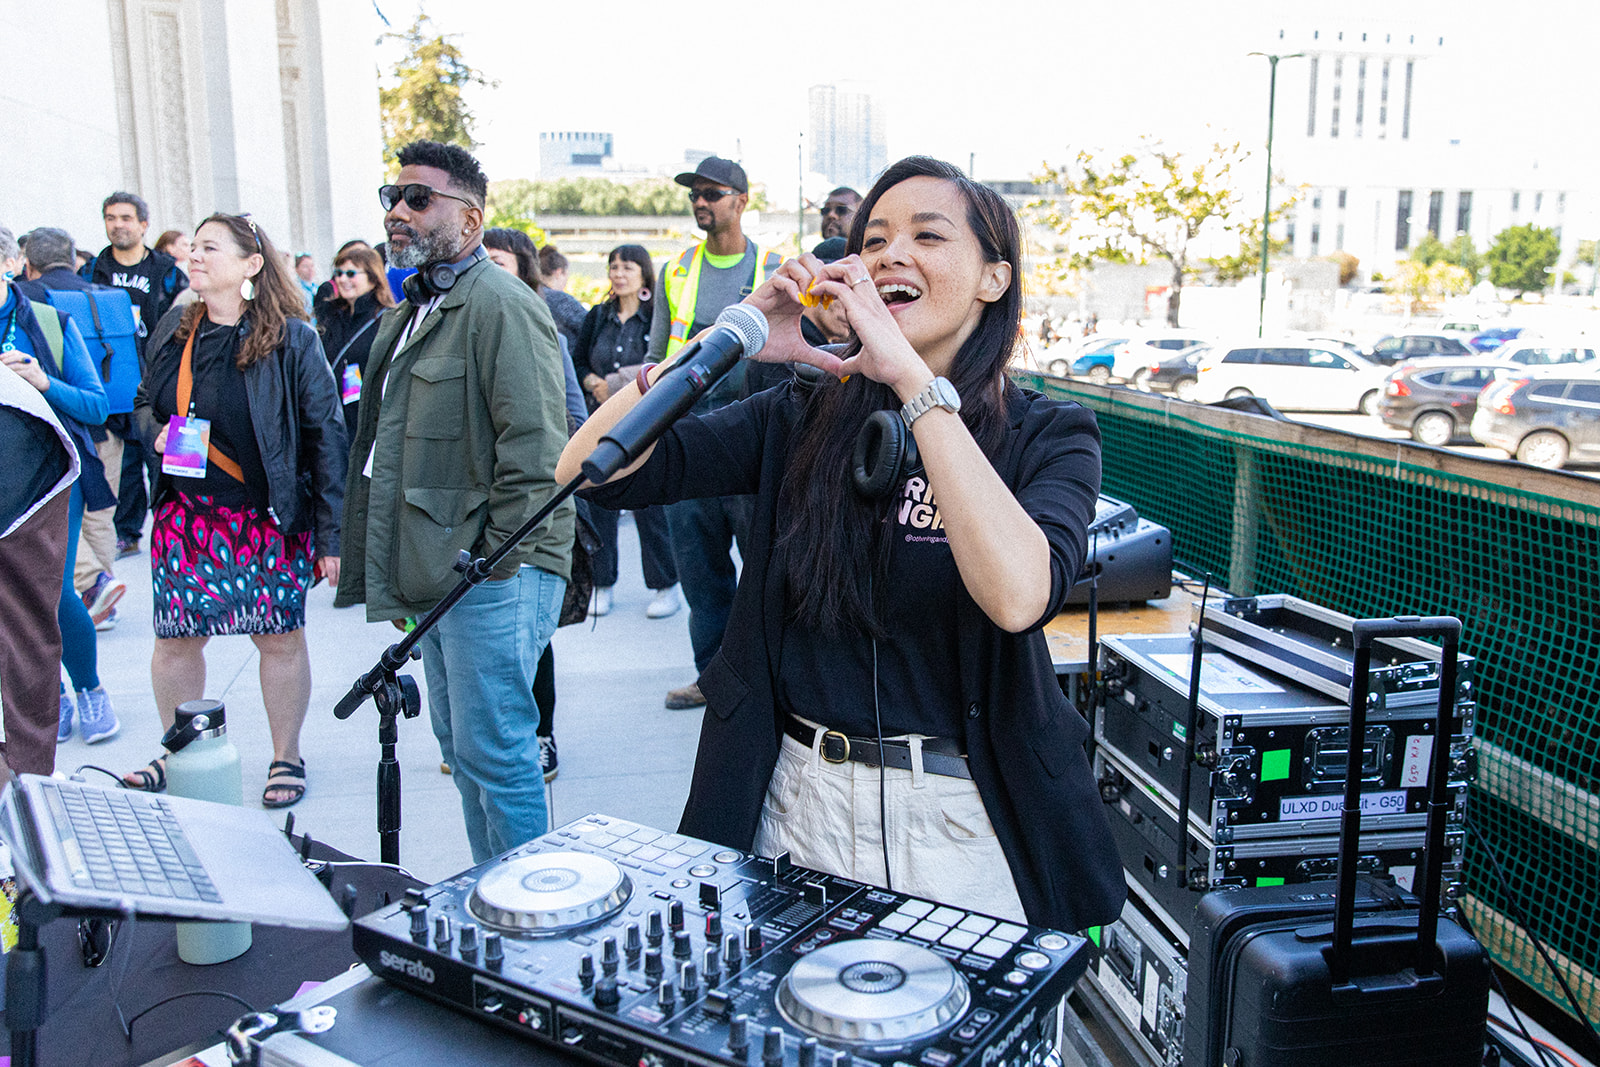 A young woman DJ makes a heart gesture with her hands